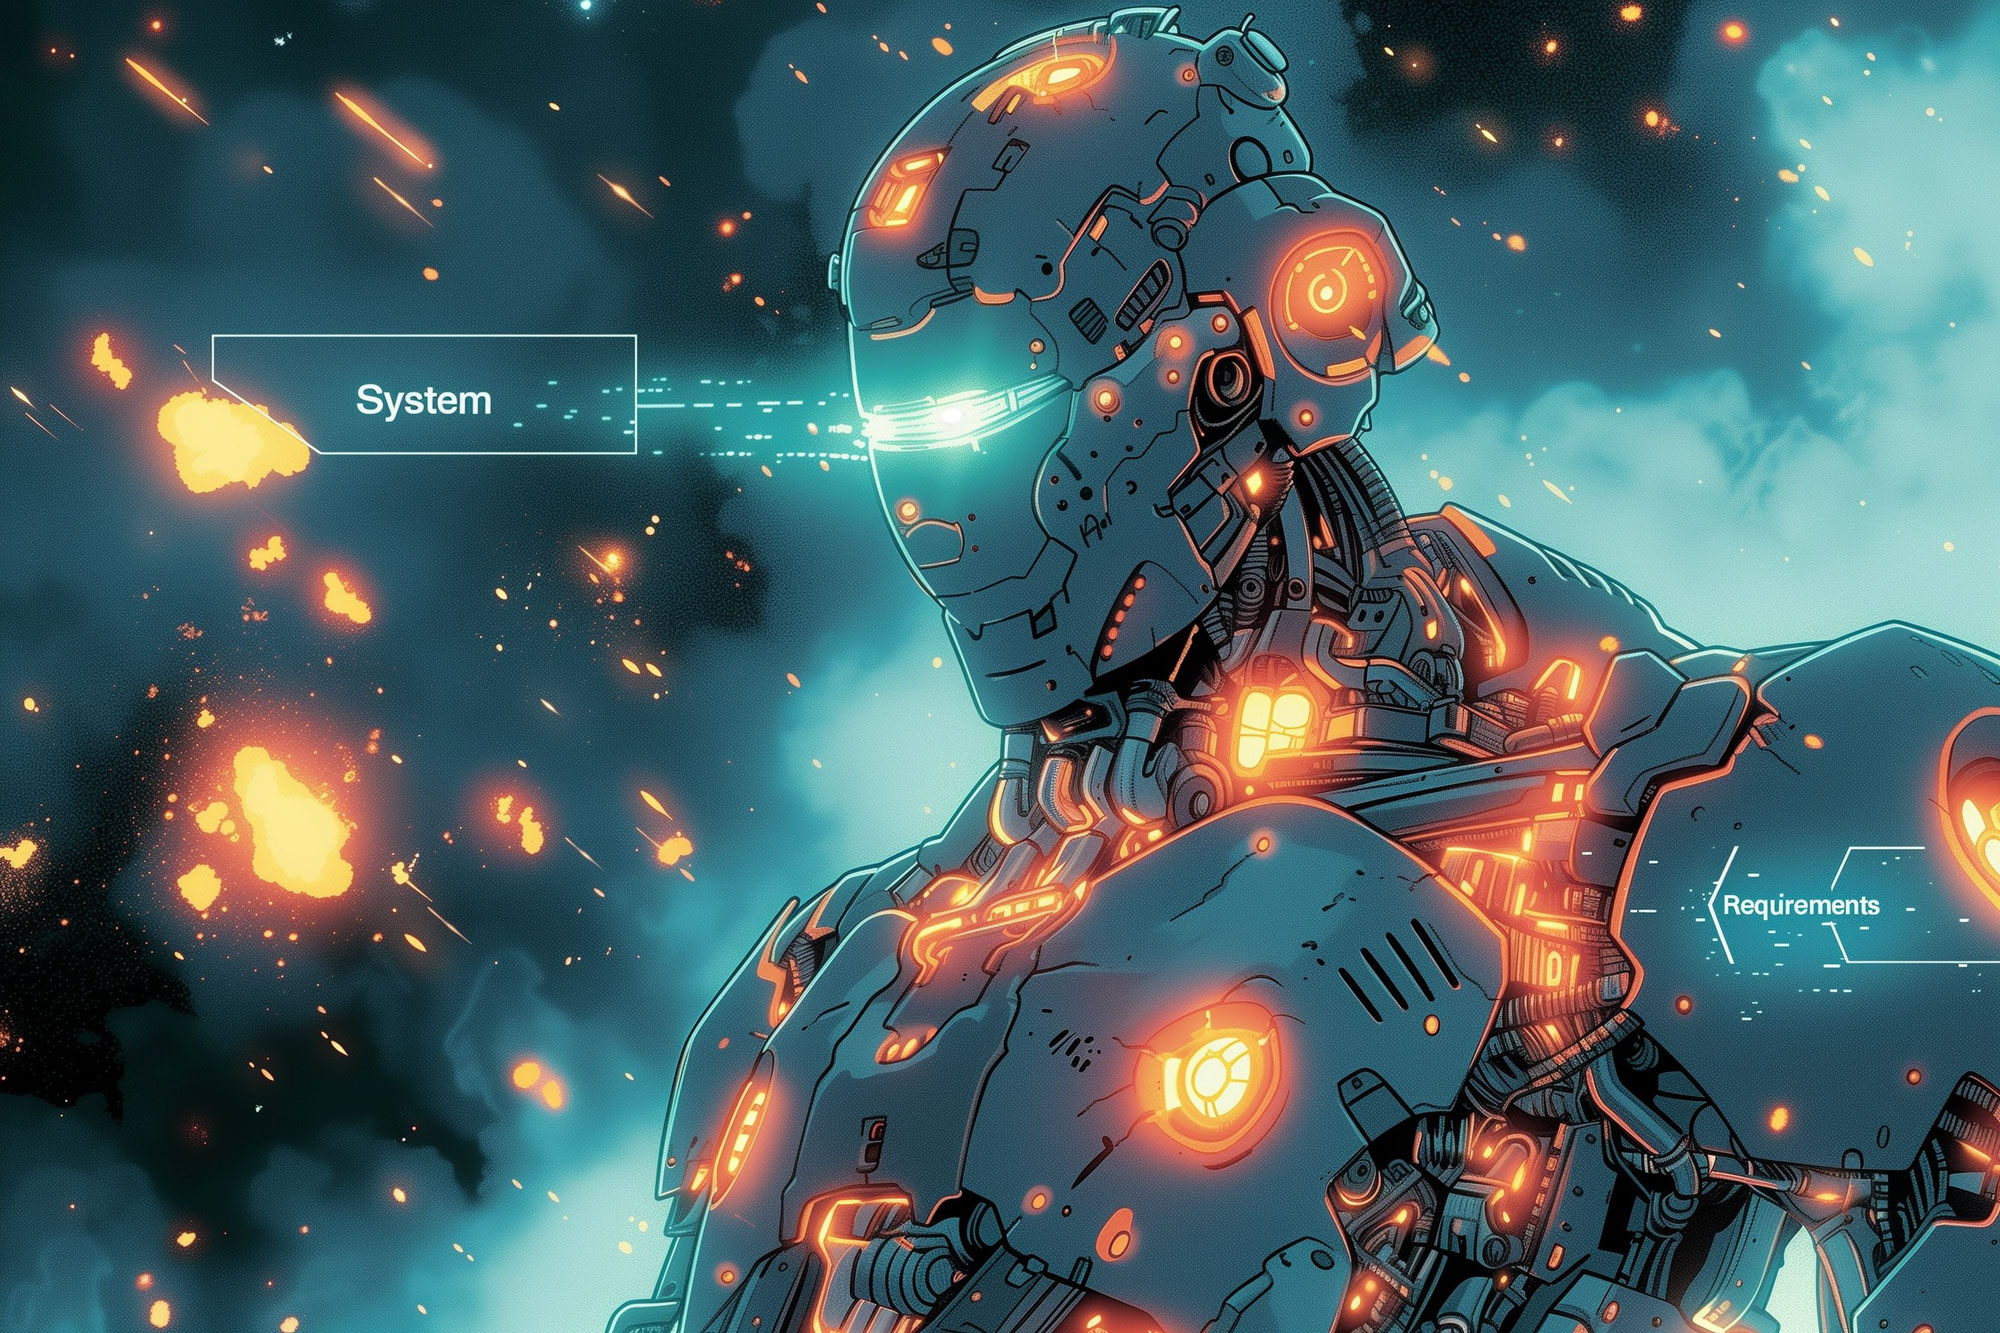 Powerful Cyborg comic book art with hot particles - System Requirements for Stable Diffusion